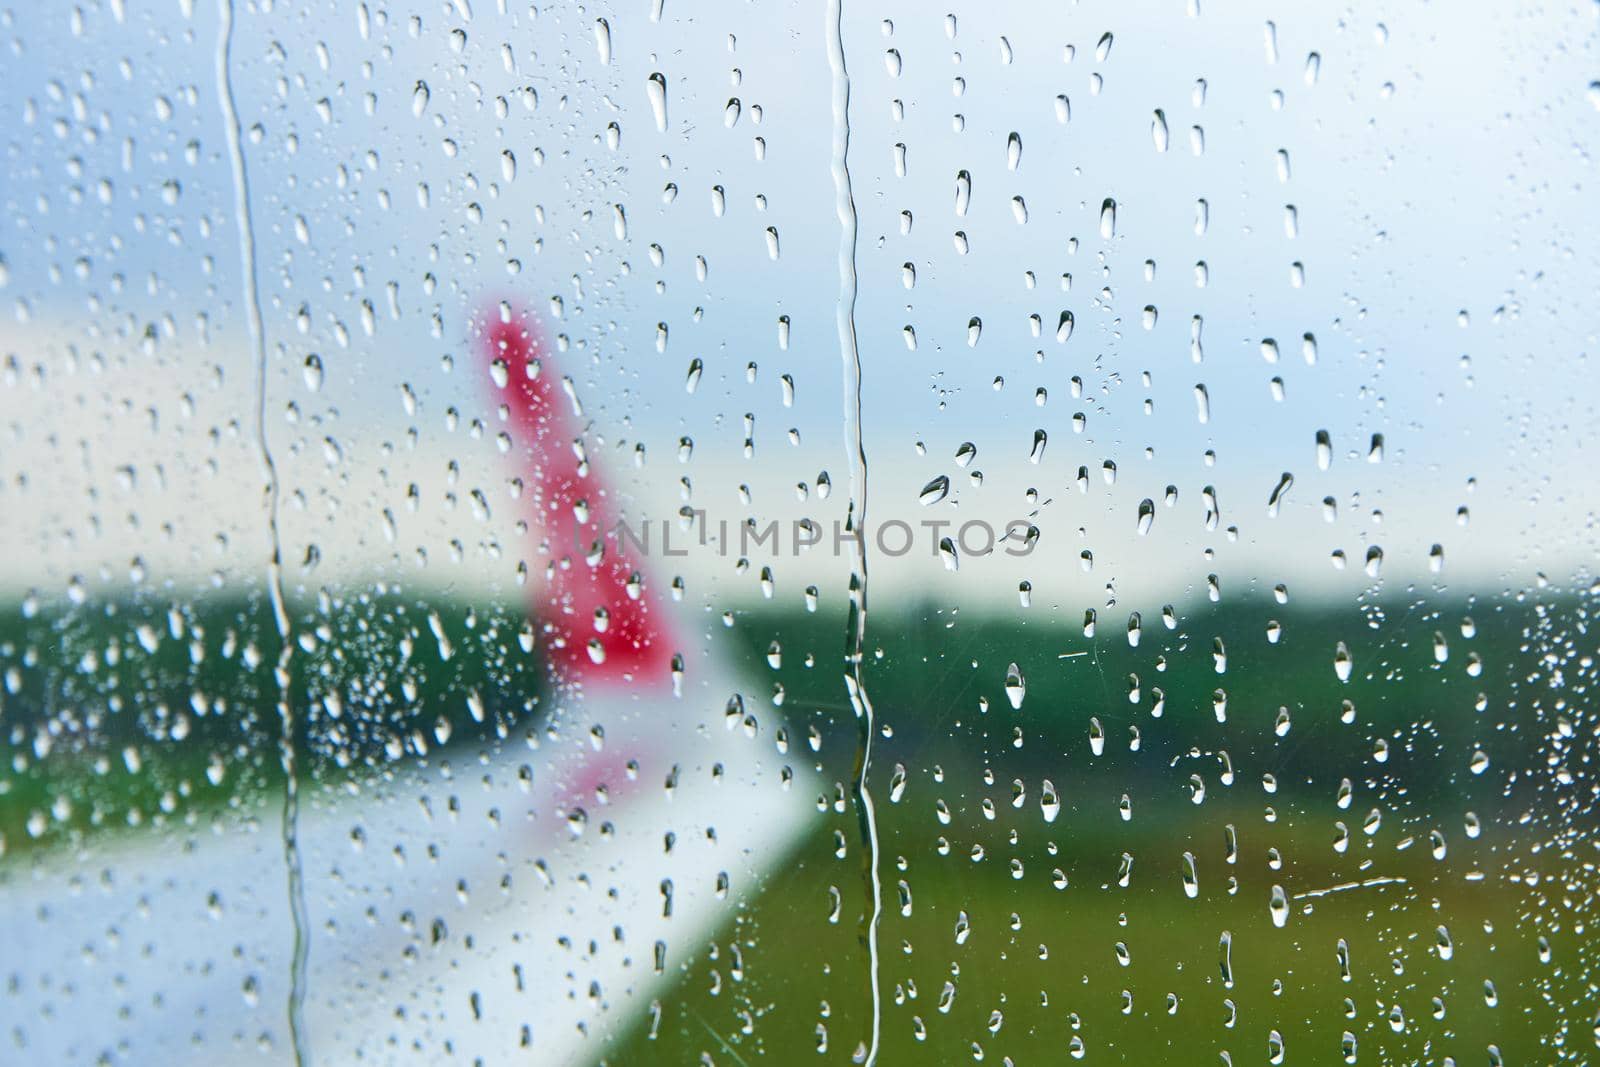 View through the foggy glass of an airplane before takeoff on a rainy day.